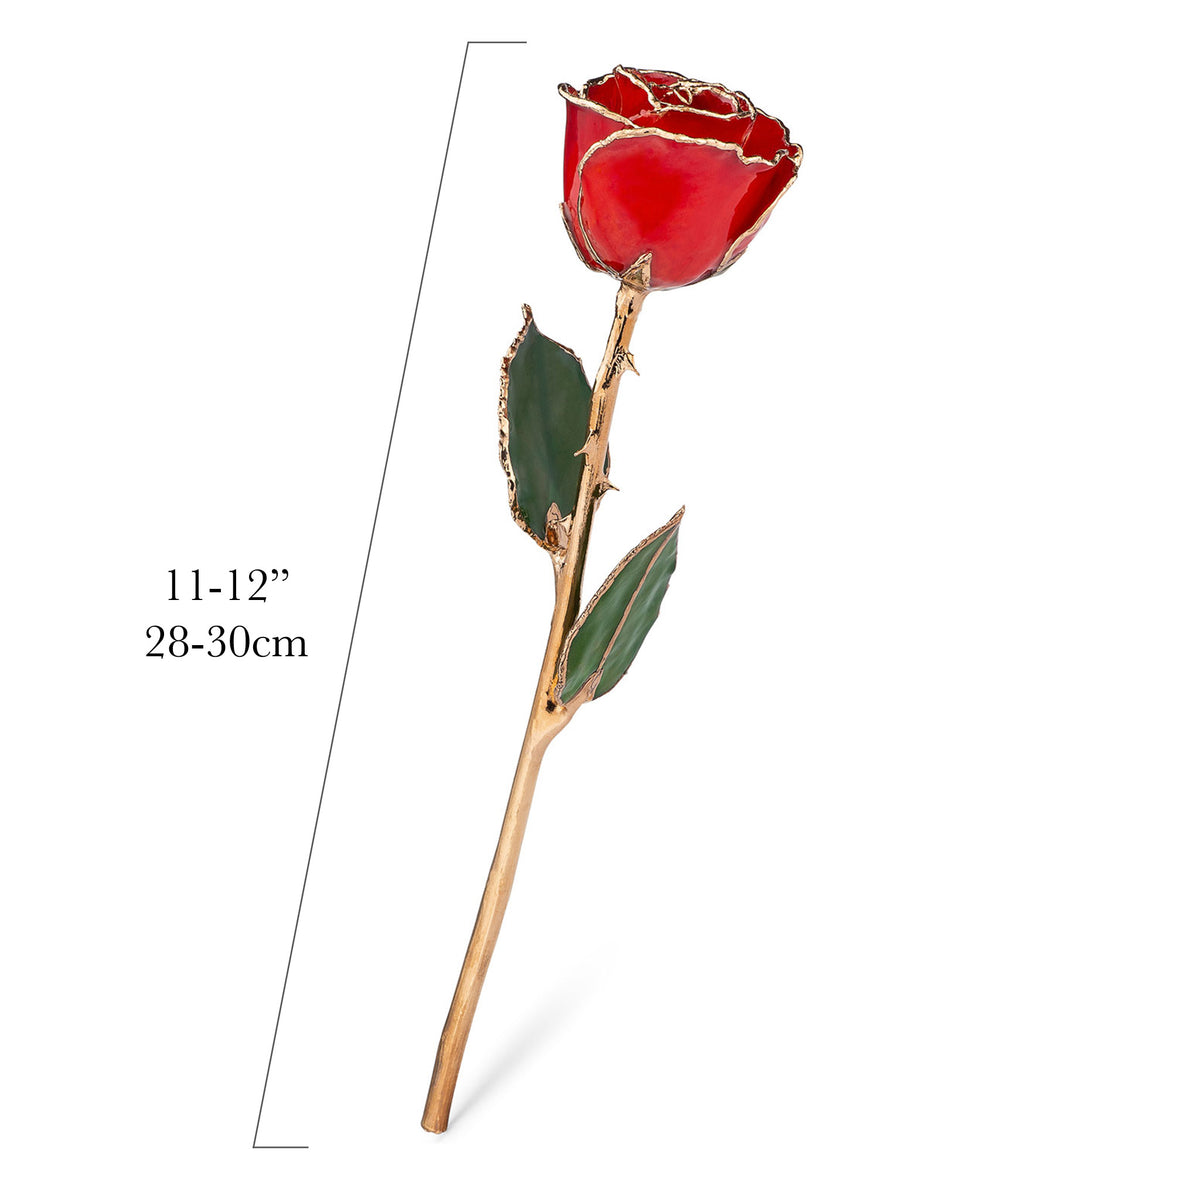 24K Gold Trimmed Forever Rose with Red Petals. View of Stem, Leaves, and Rose Petals and Showing Detail of Gold Trim with measurements of rose